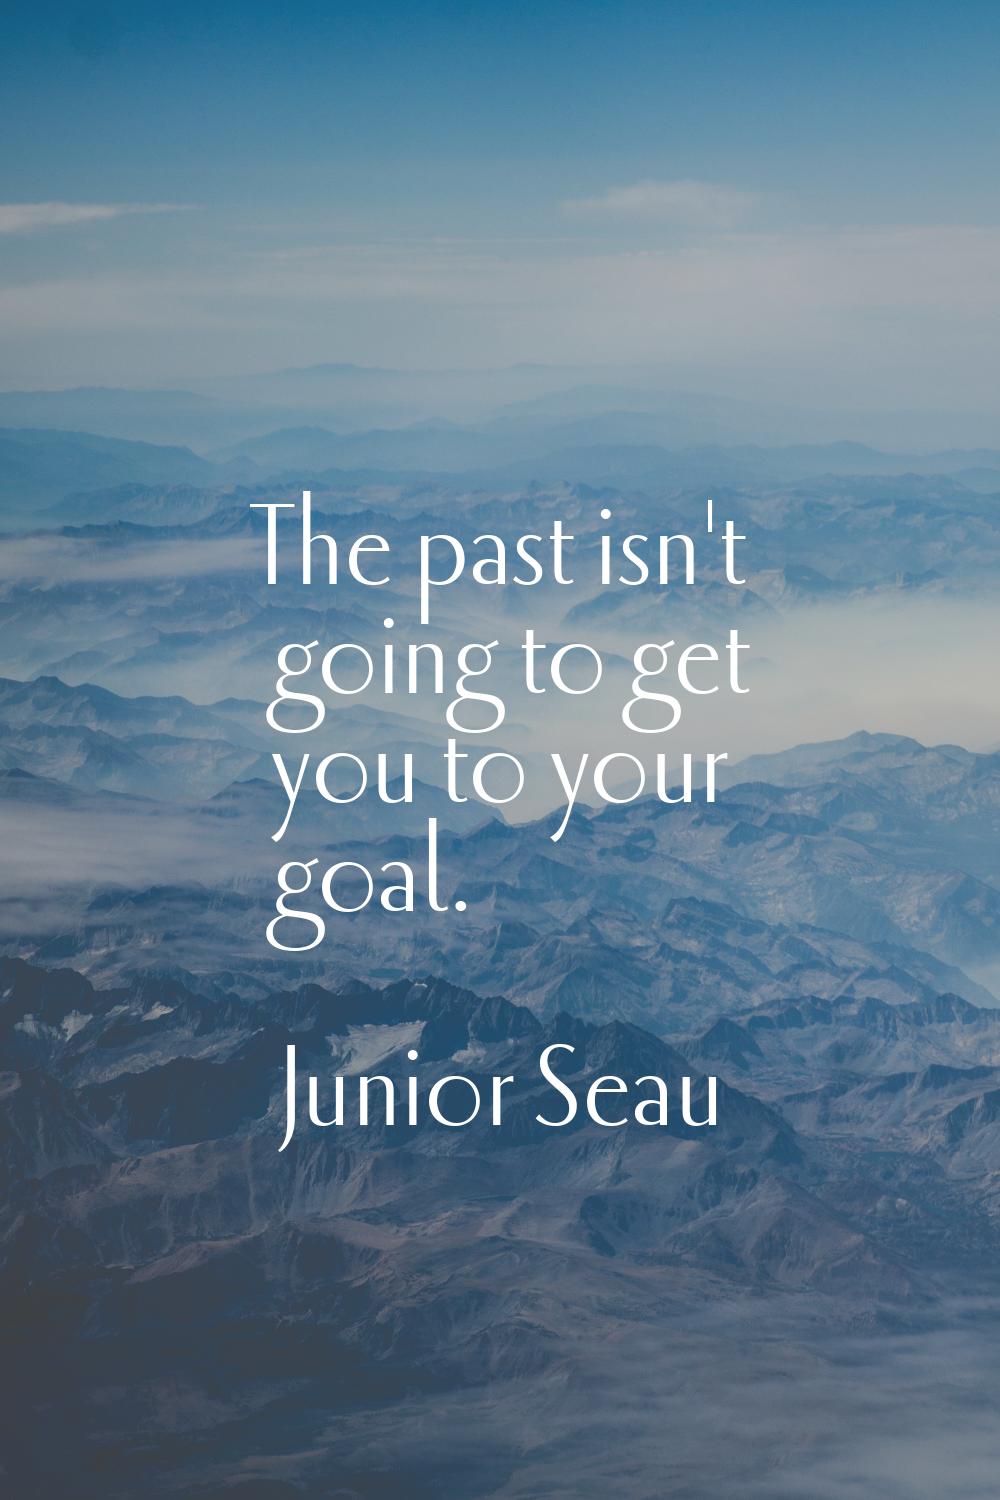 The past isn't going to get you to your goal.